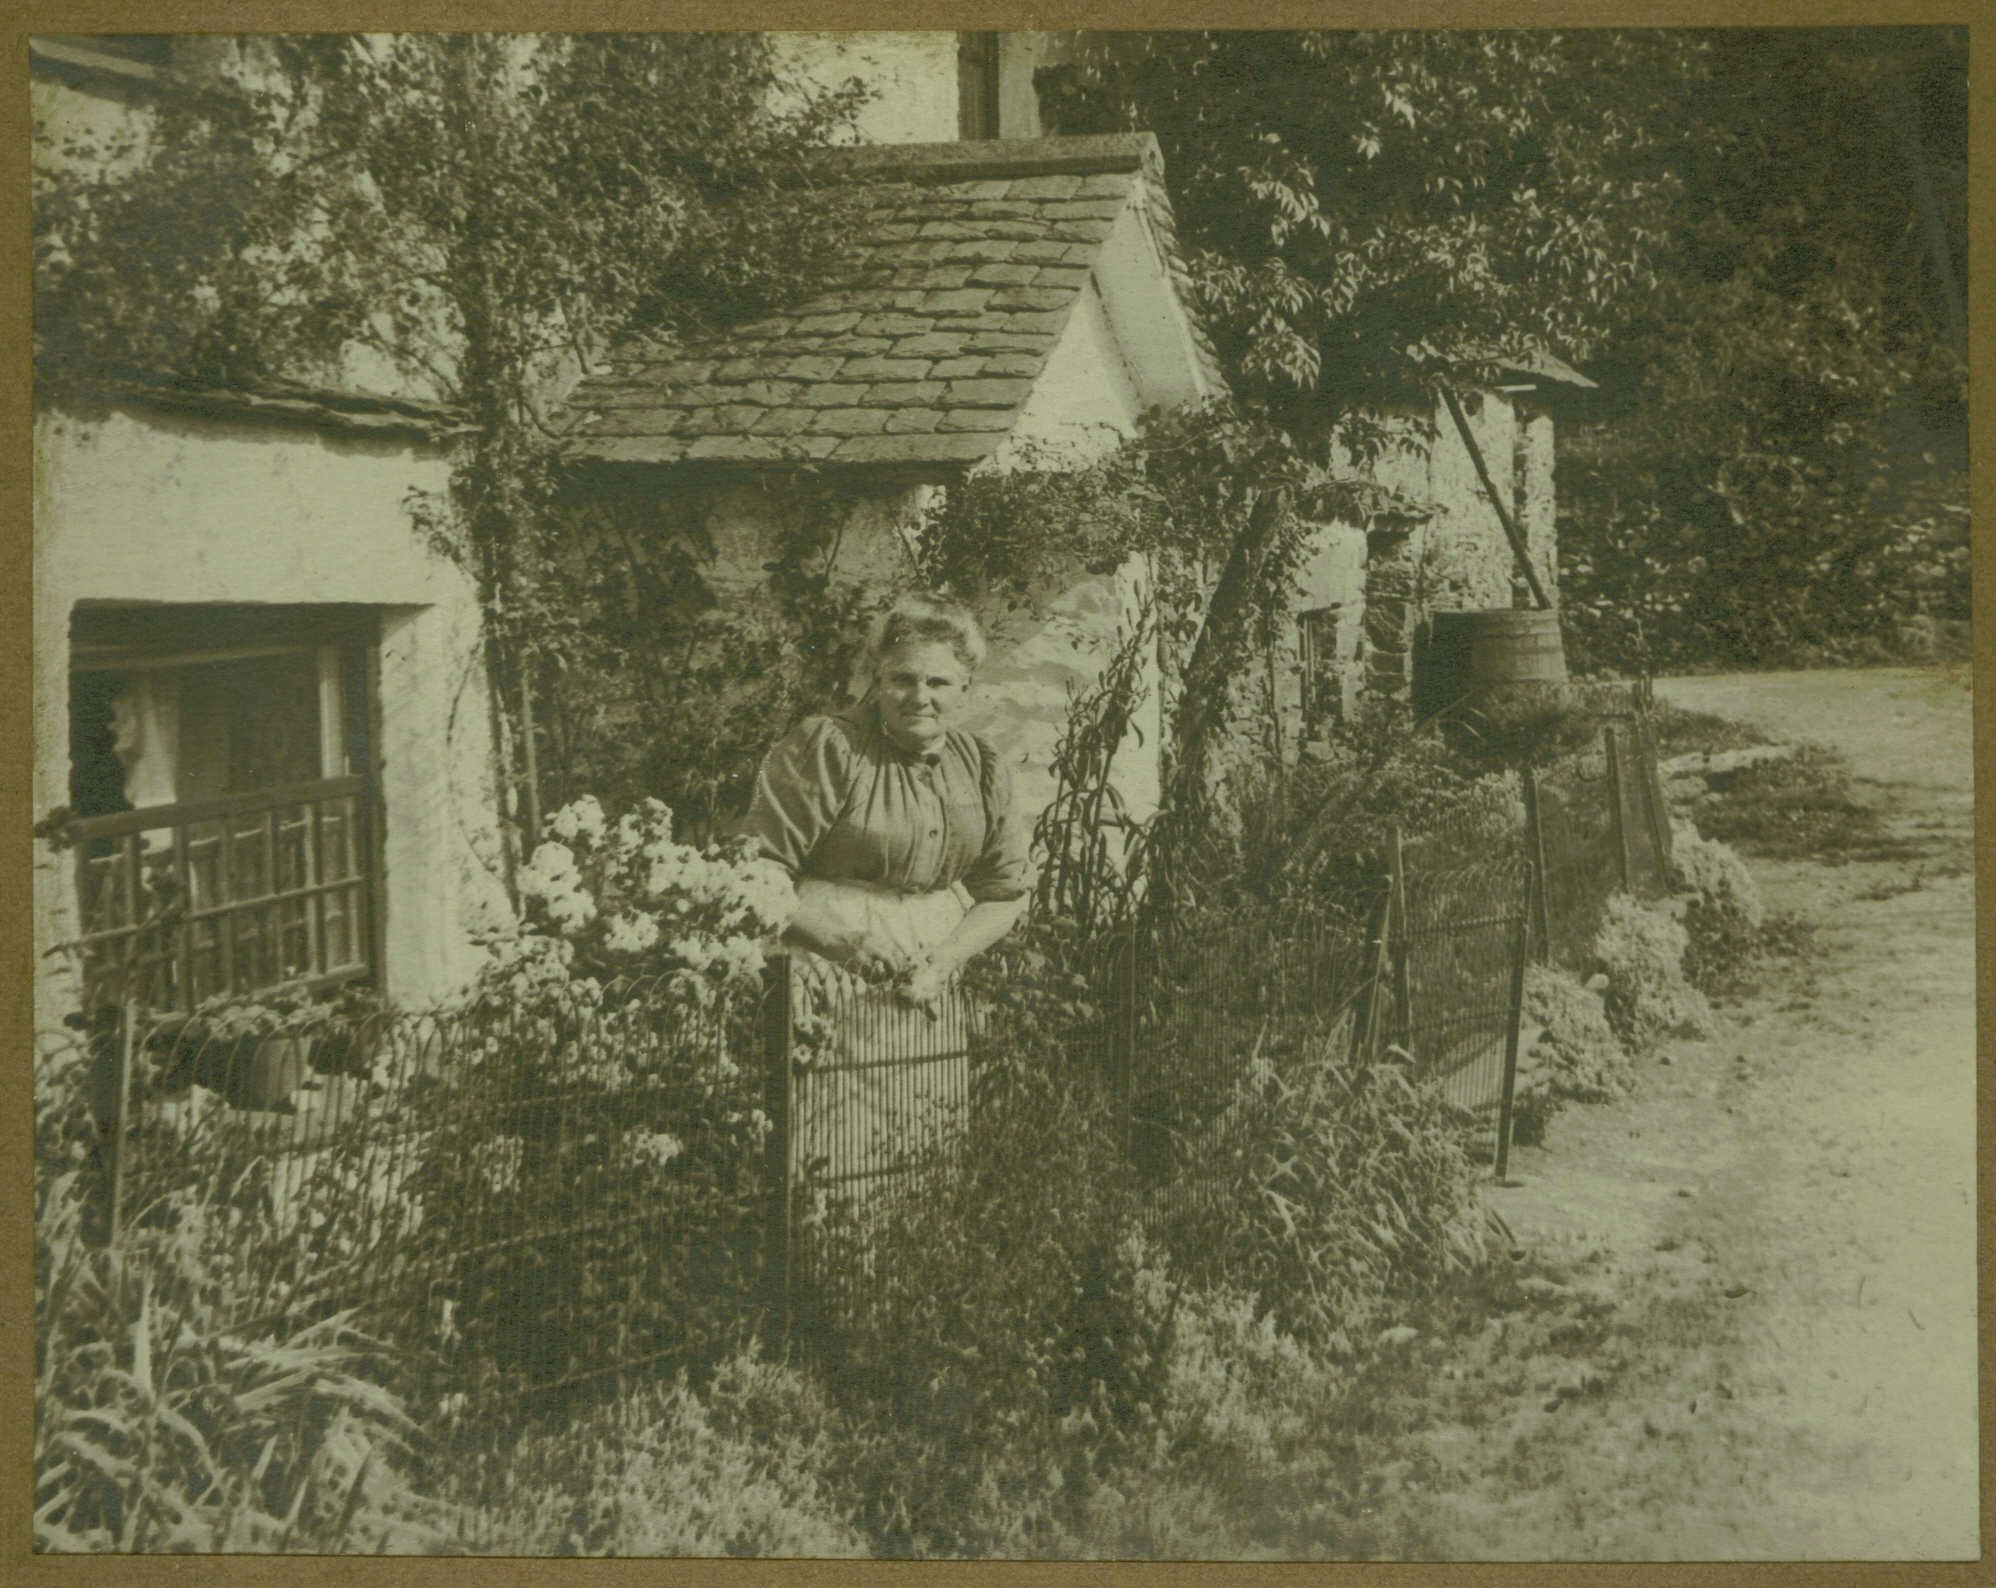 Anne Irwin outside Old Farm Cottage. The photo has the Year - 1914 written on the back